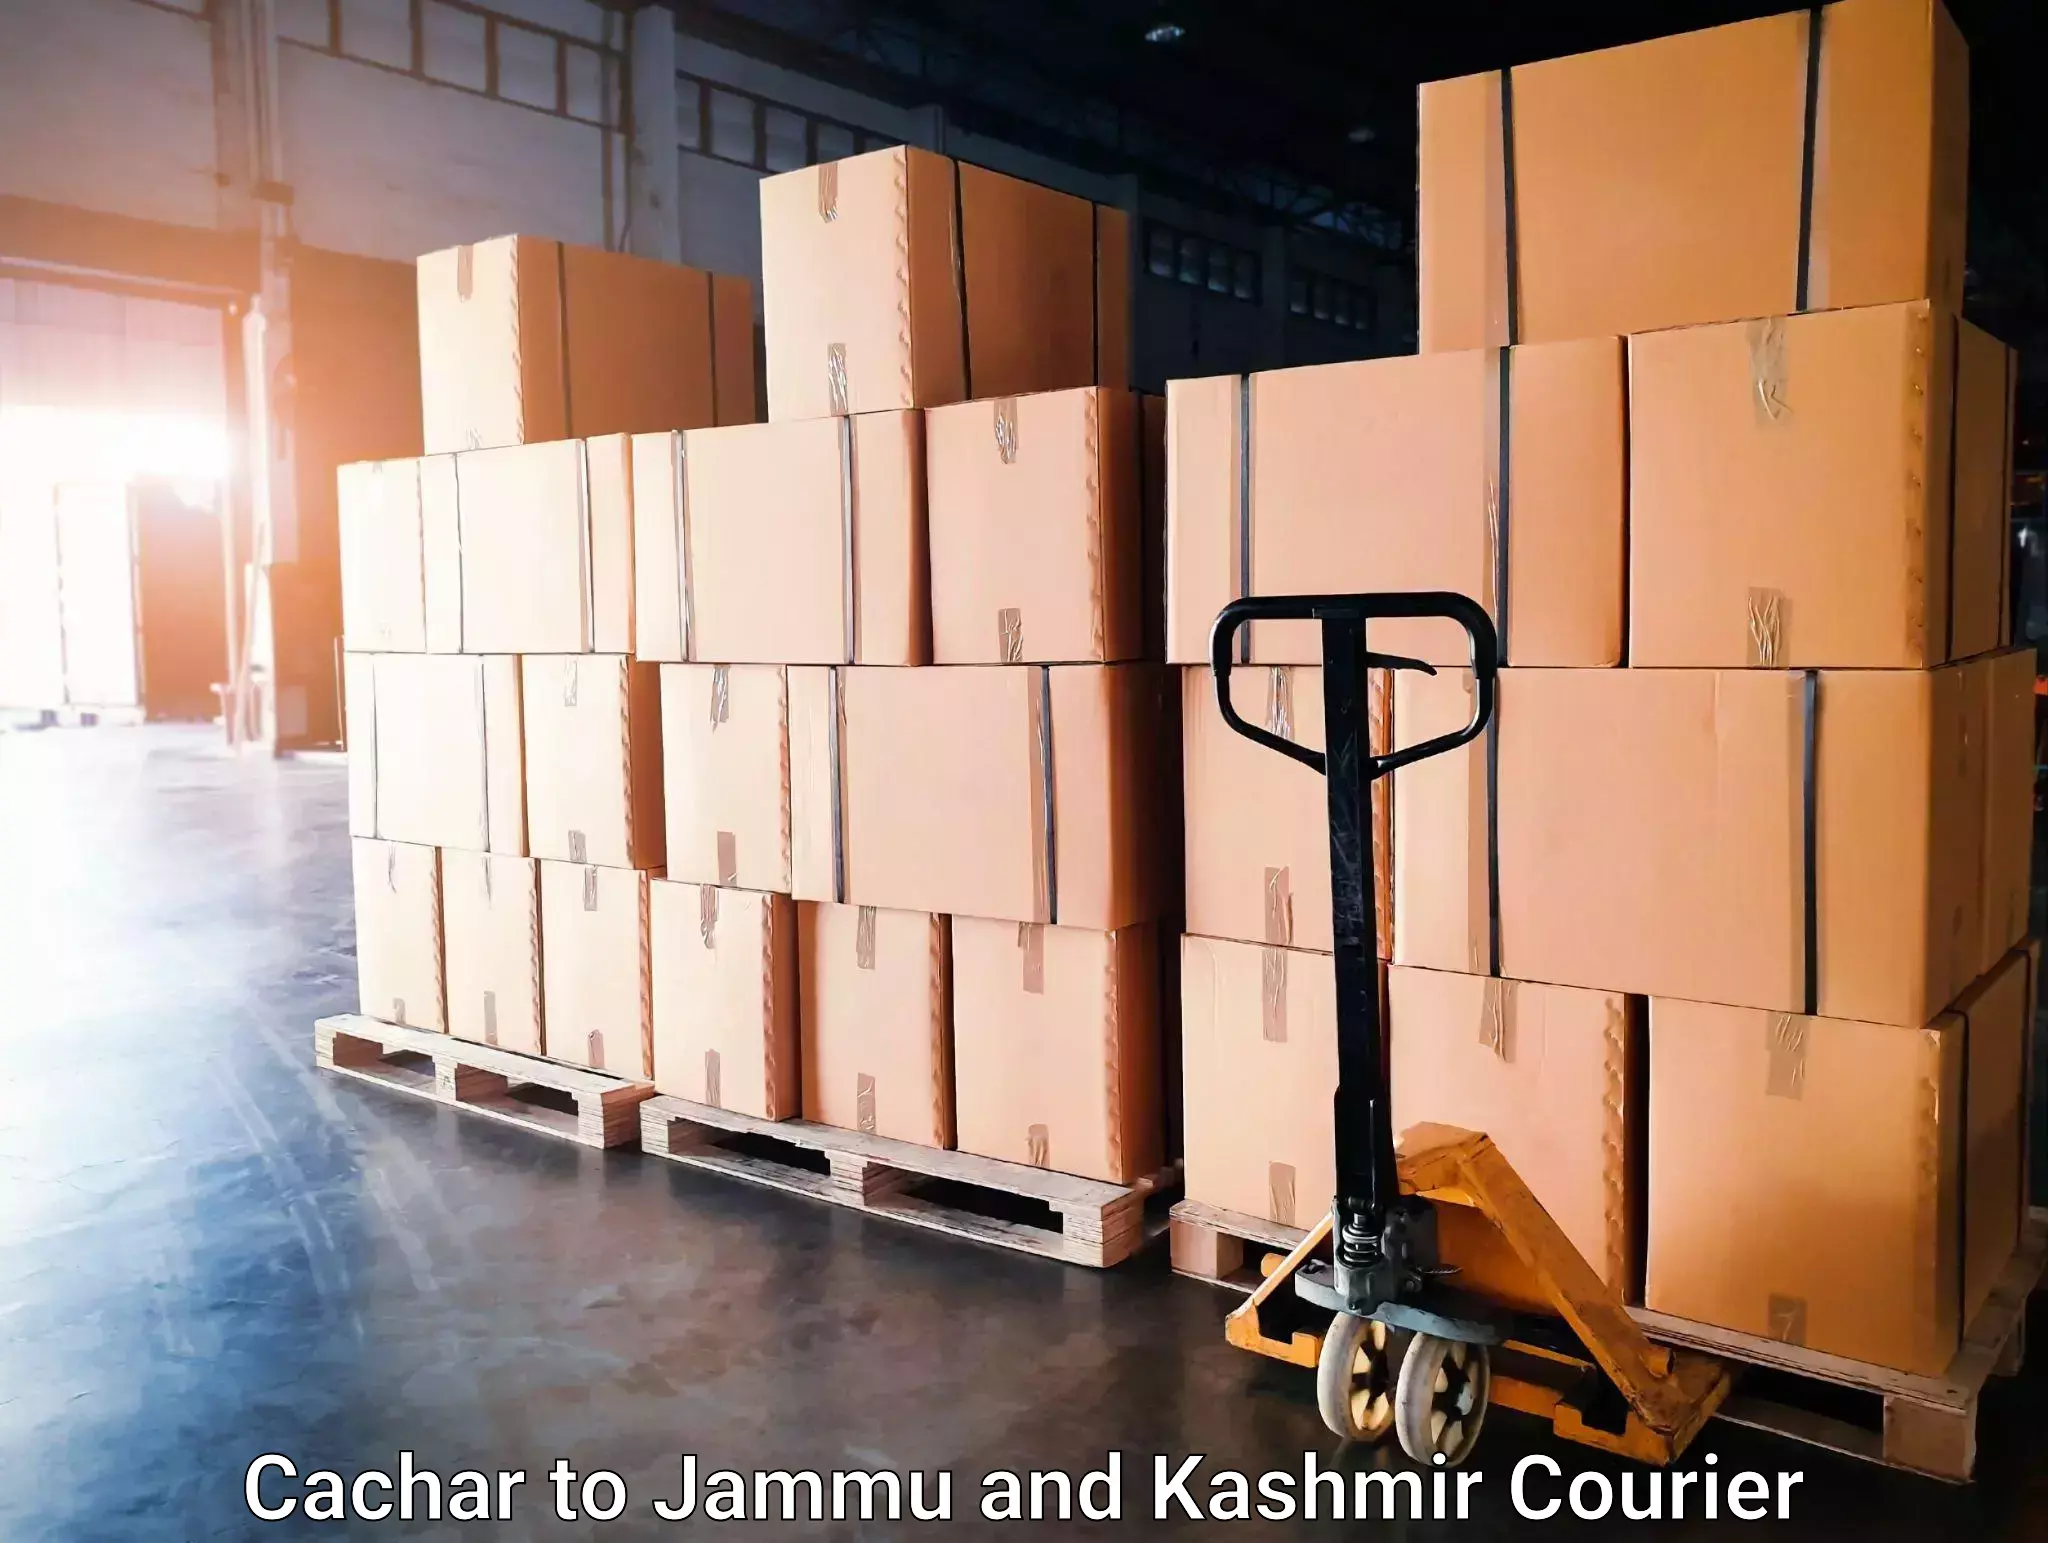 Modern courier technology in Cachar to Budgam